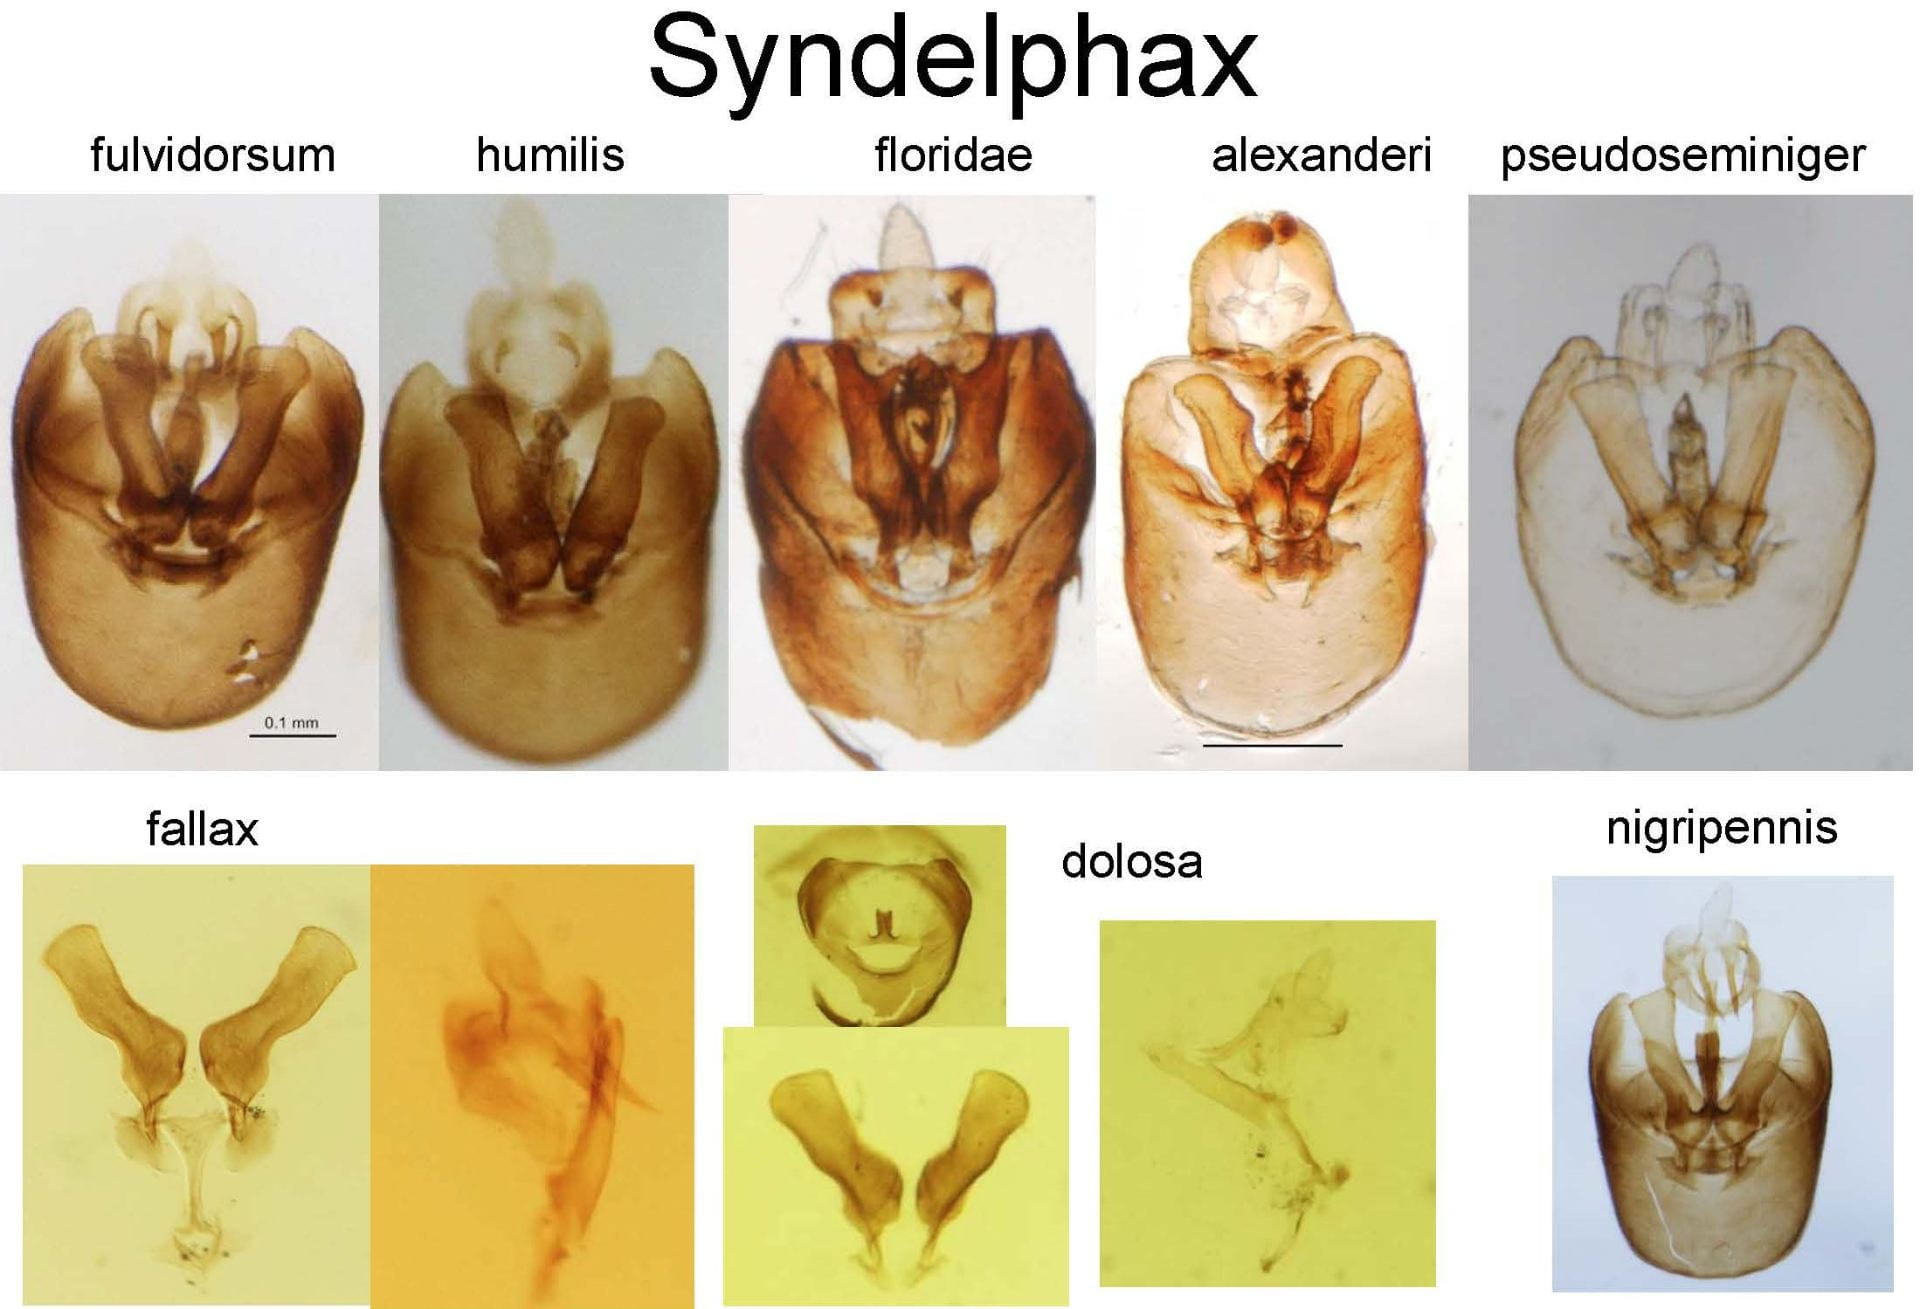 Tails of New World Syndelphax species